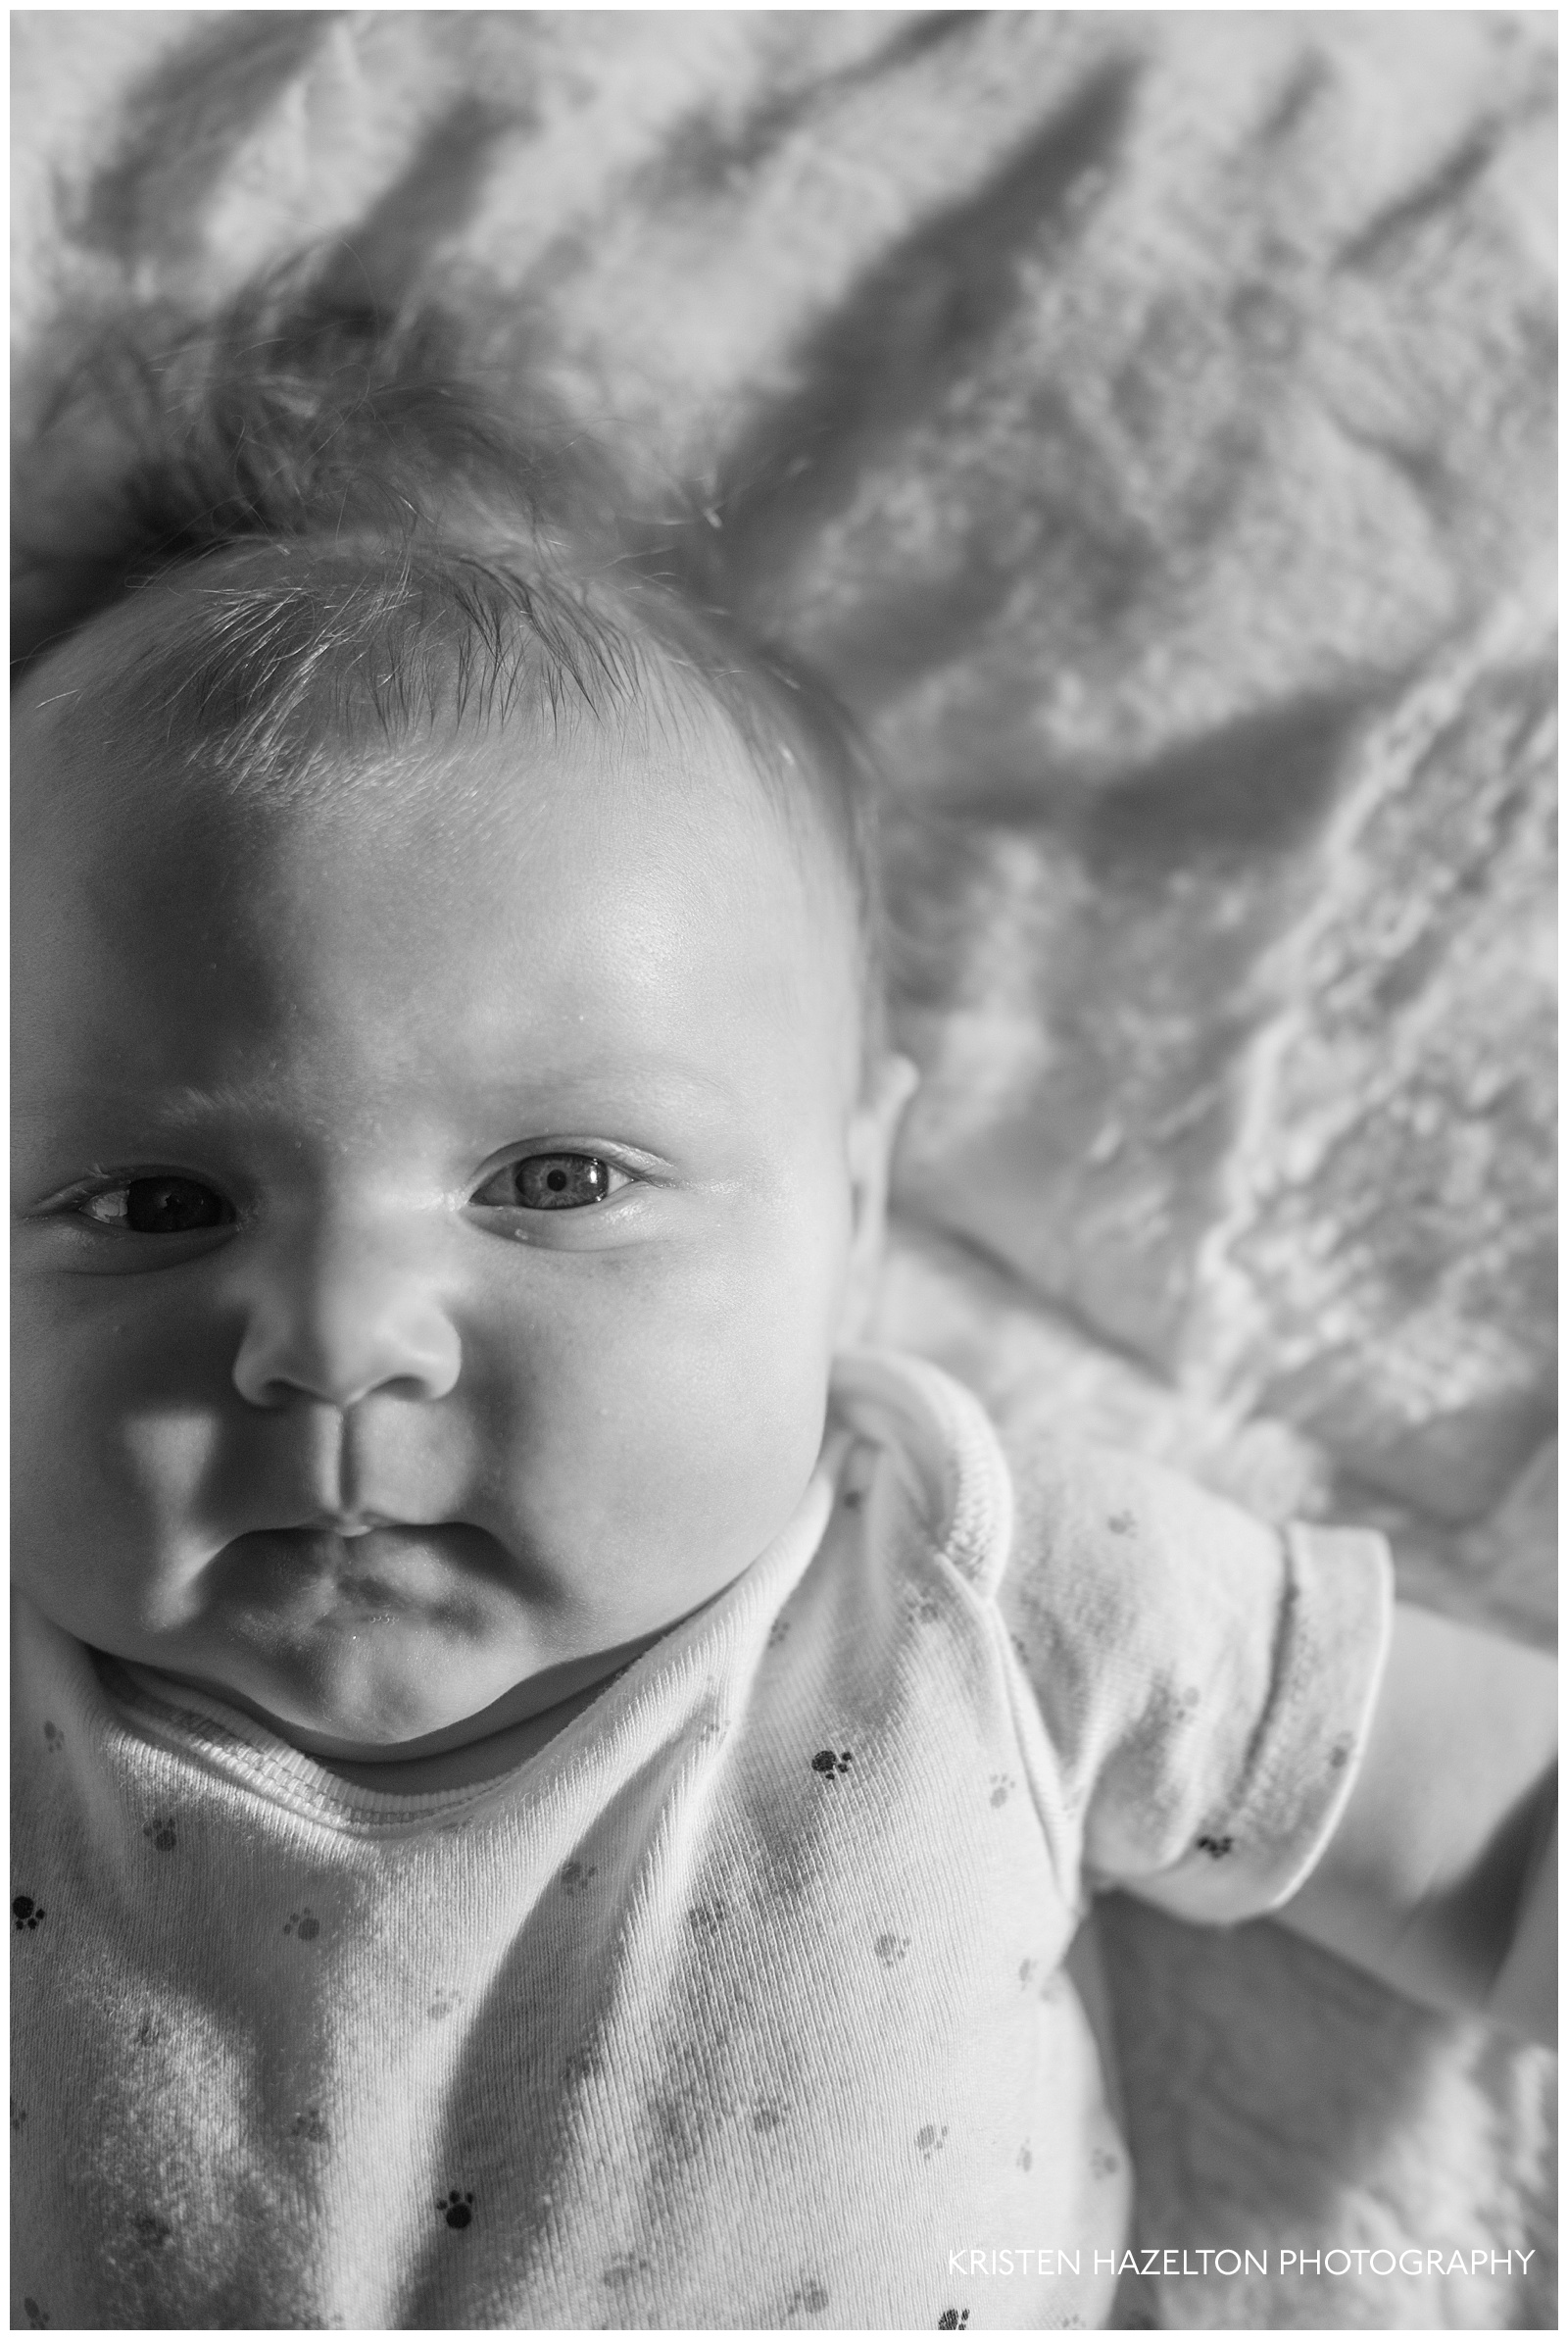 Split-lighting black and white portrait of a two-month old baby